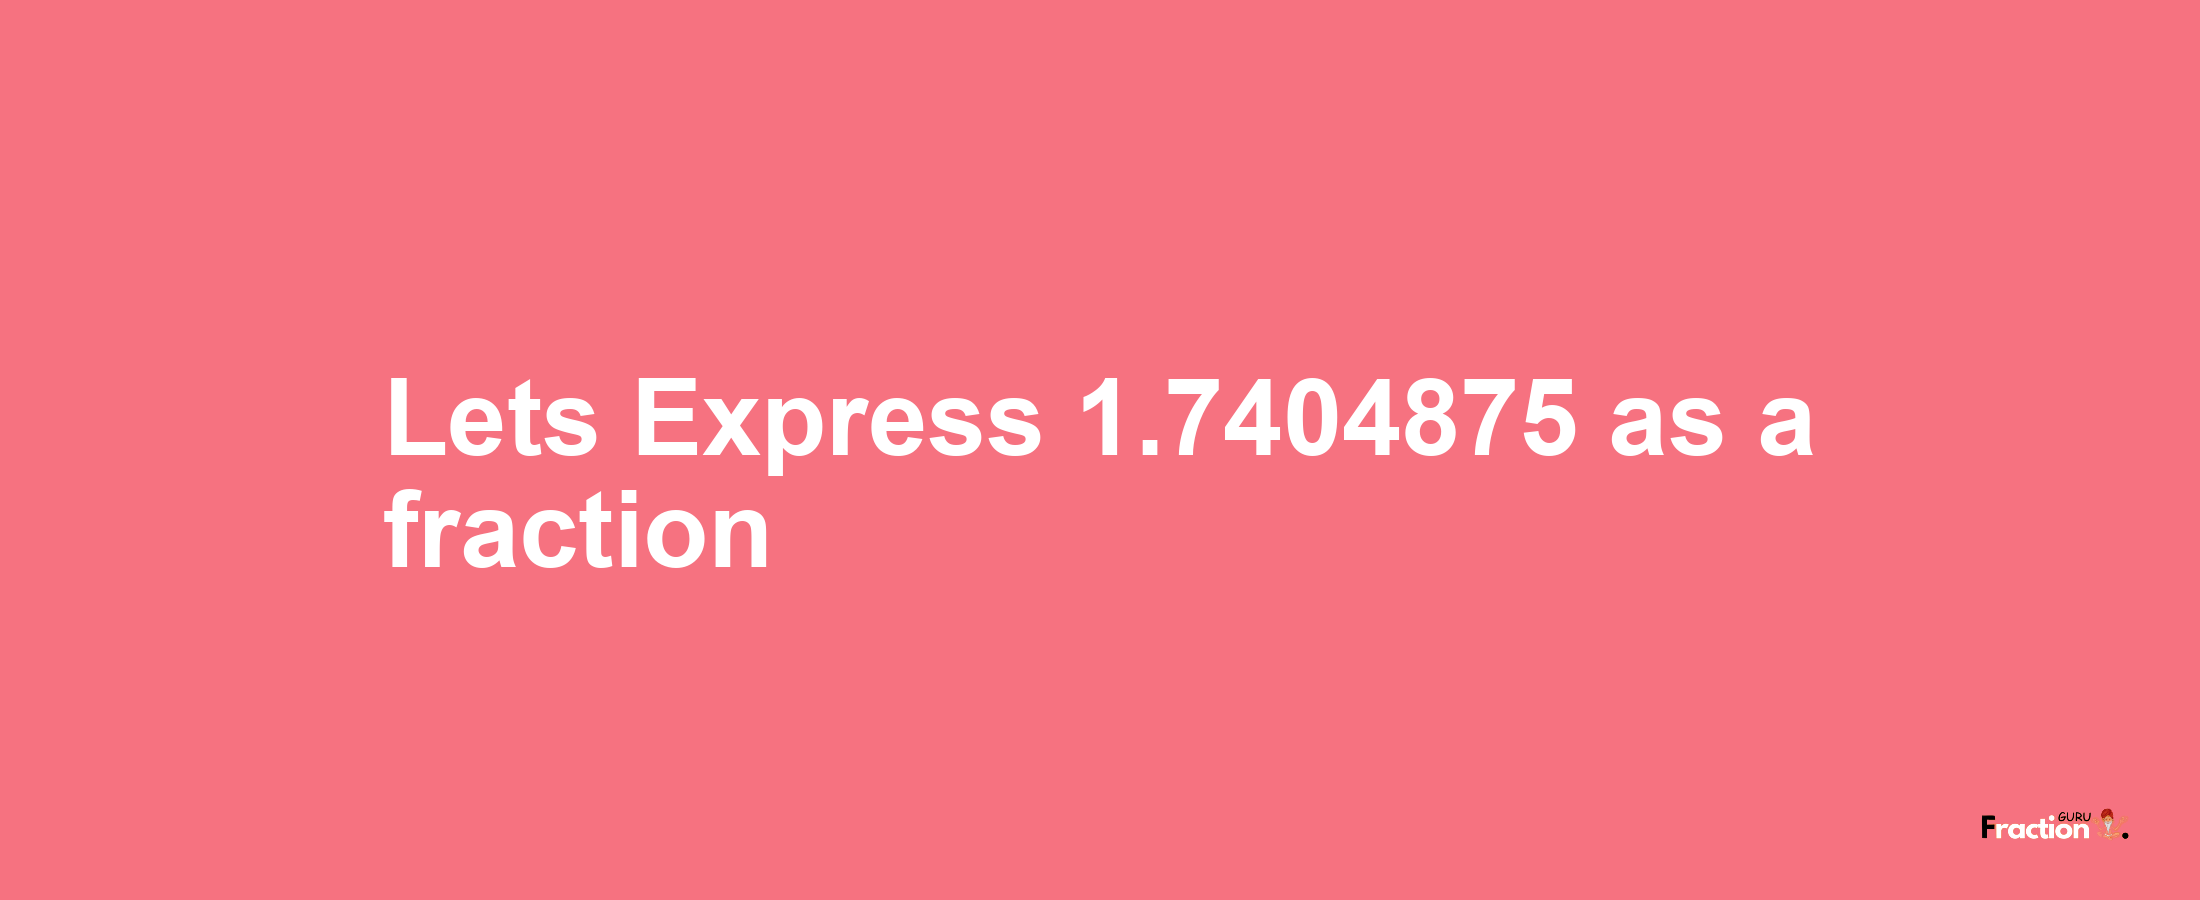 Lets Express 1.7404875 as afraction